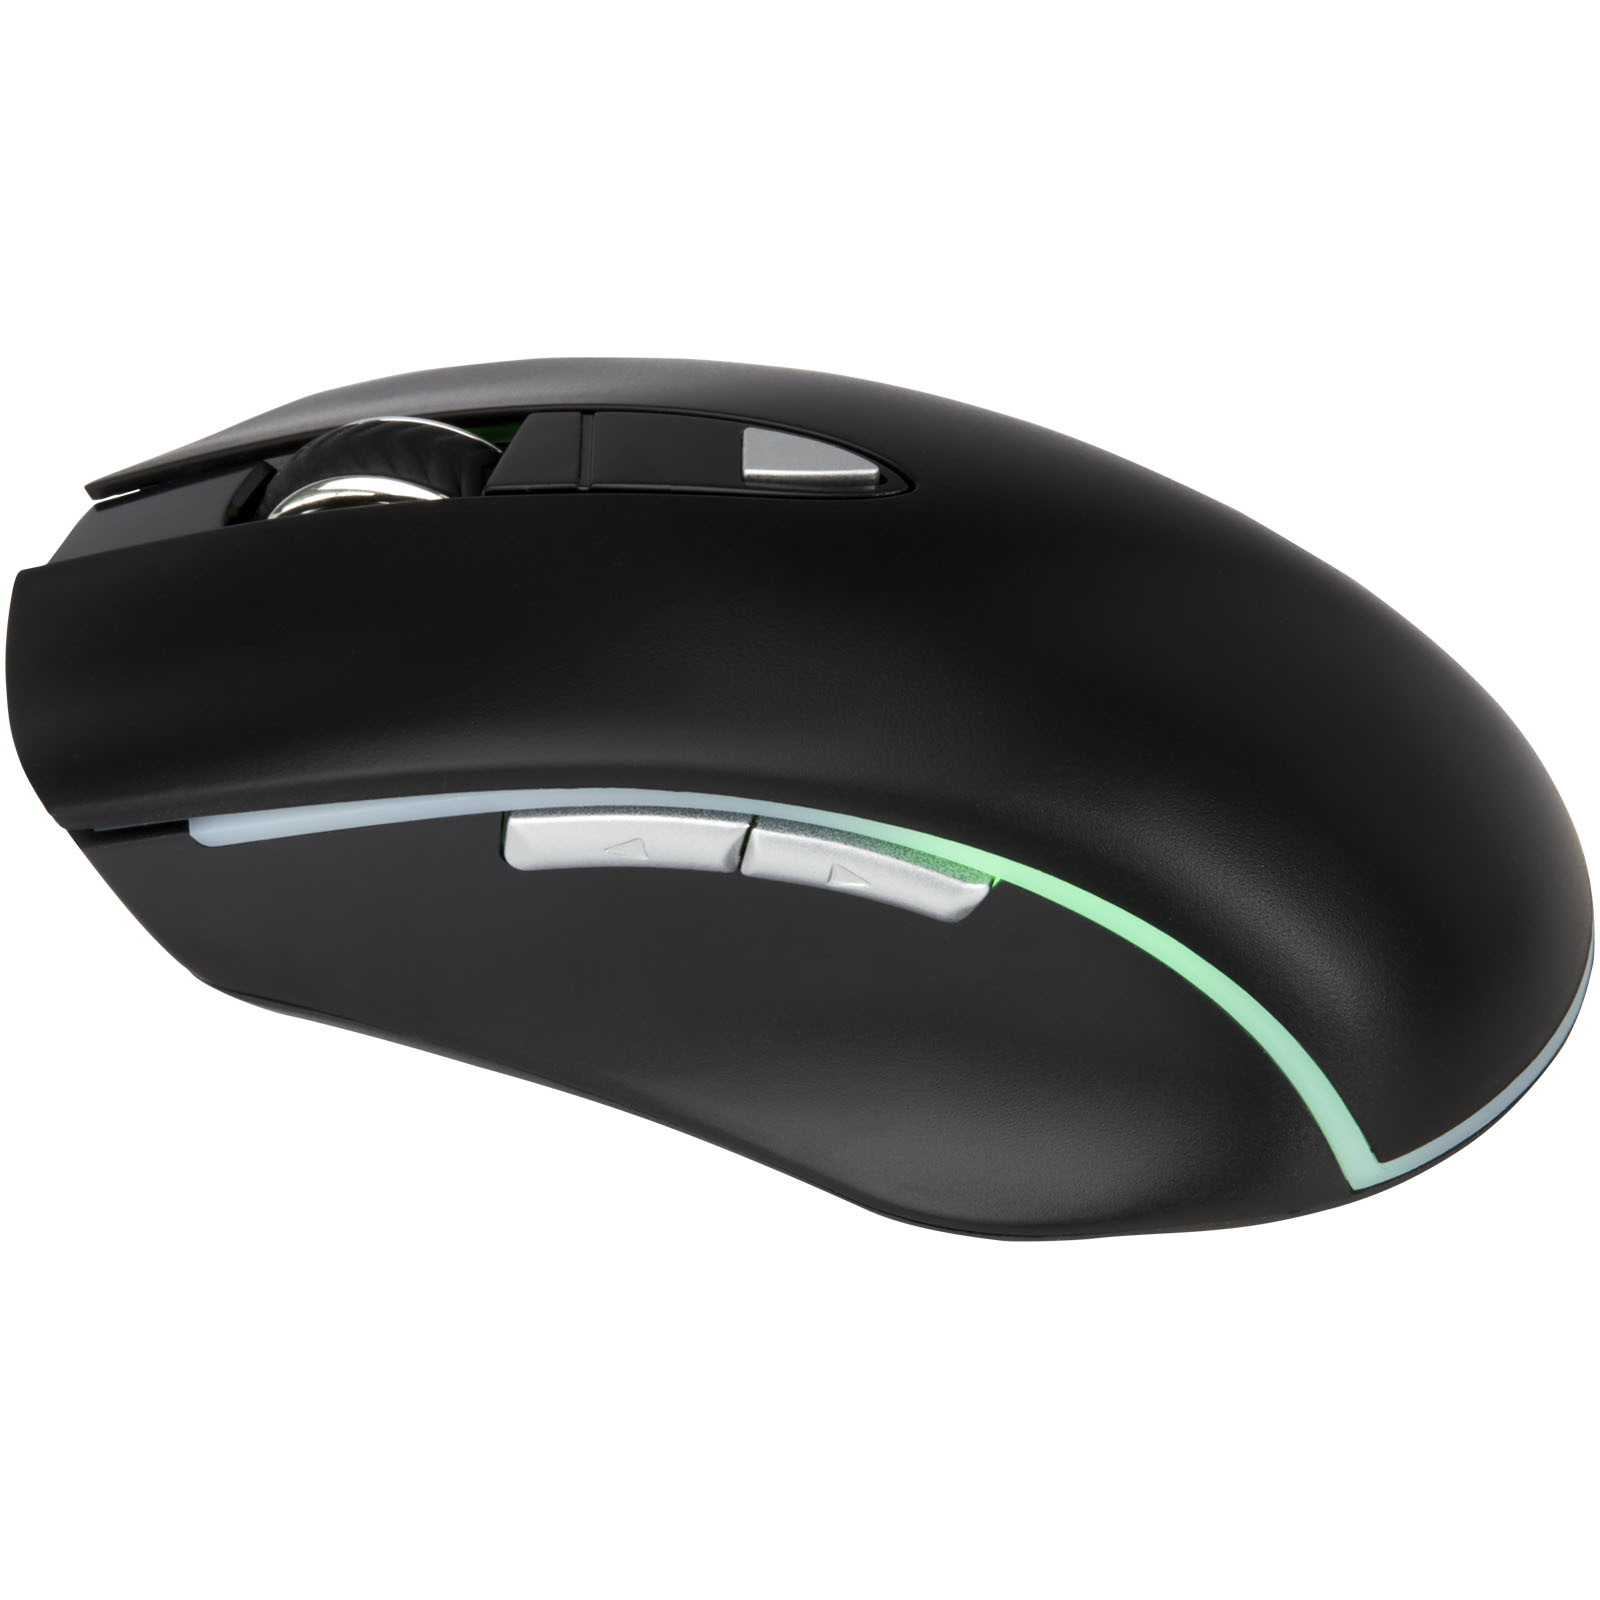 Computer Accessories - Gleam light-up mouse